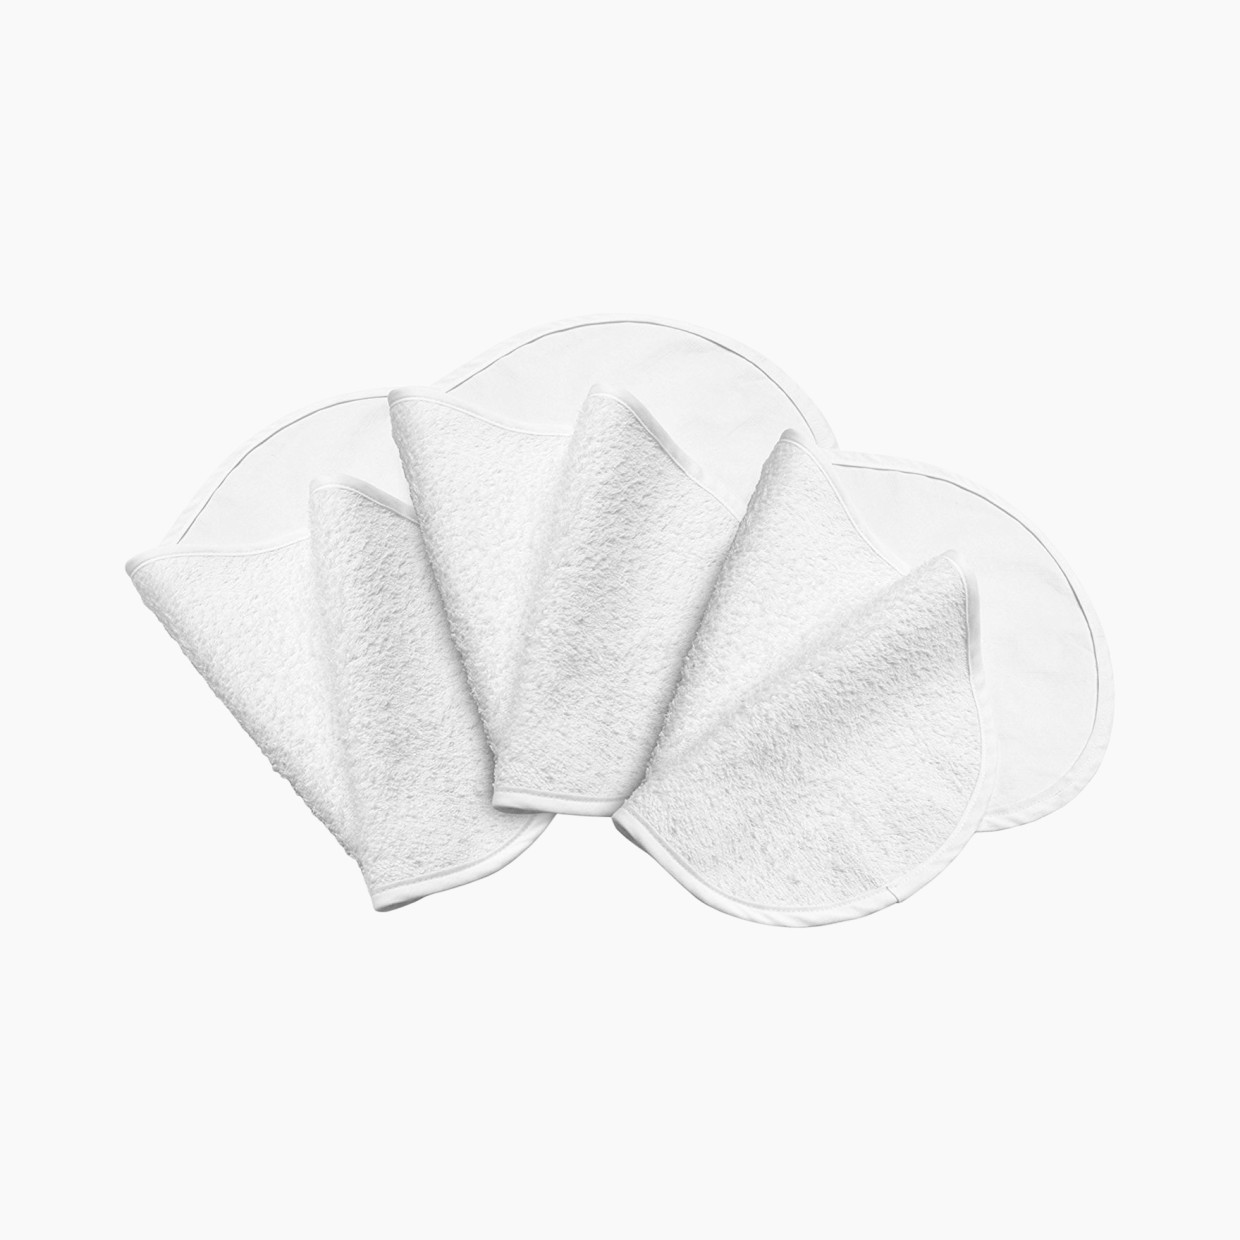 Boppy Changing Pad Liners - White.